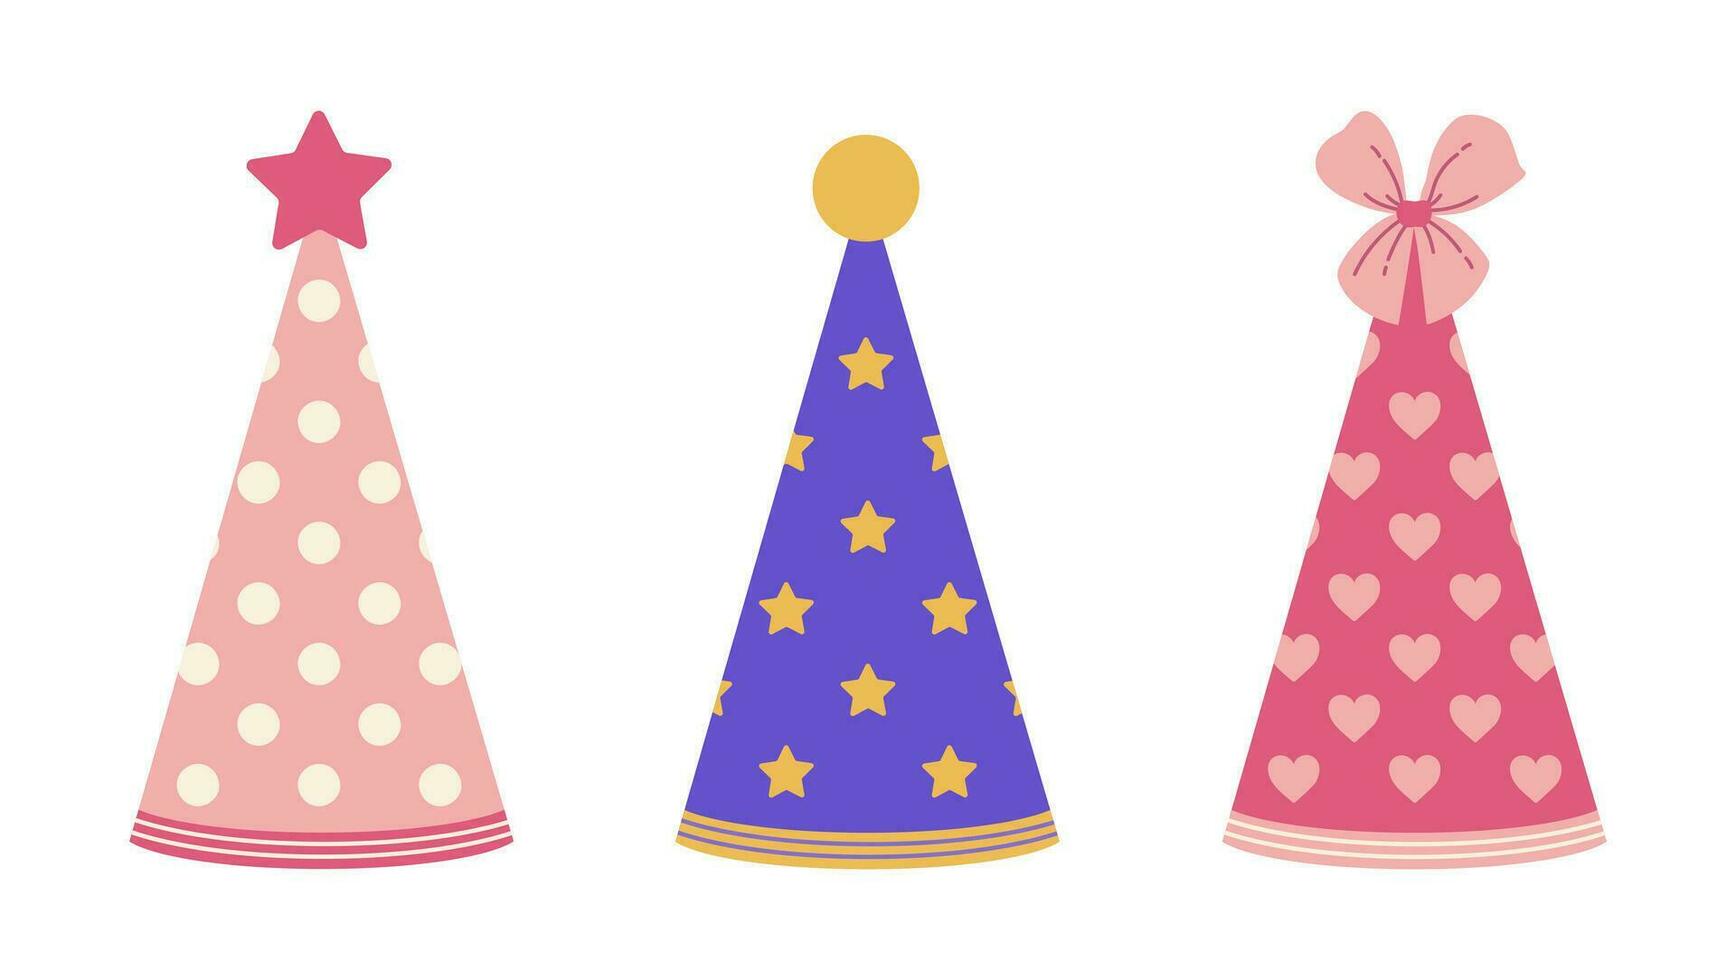 Party hat vector icon collection. Colorful caps for birthday, festival, carnival, holiday. Cones with stars, hearts, polka dots. Paper headdress for kids. Flat cartoon clipart isolated on white